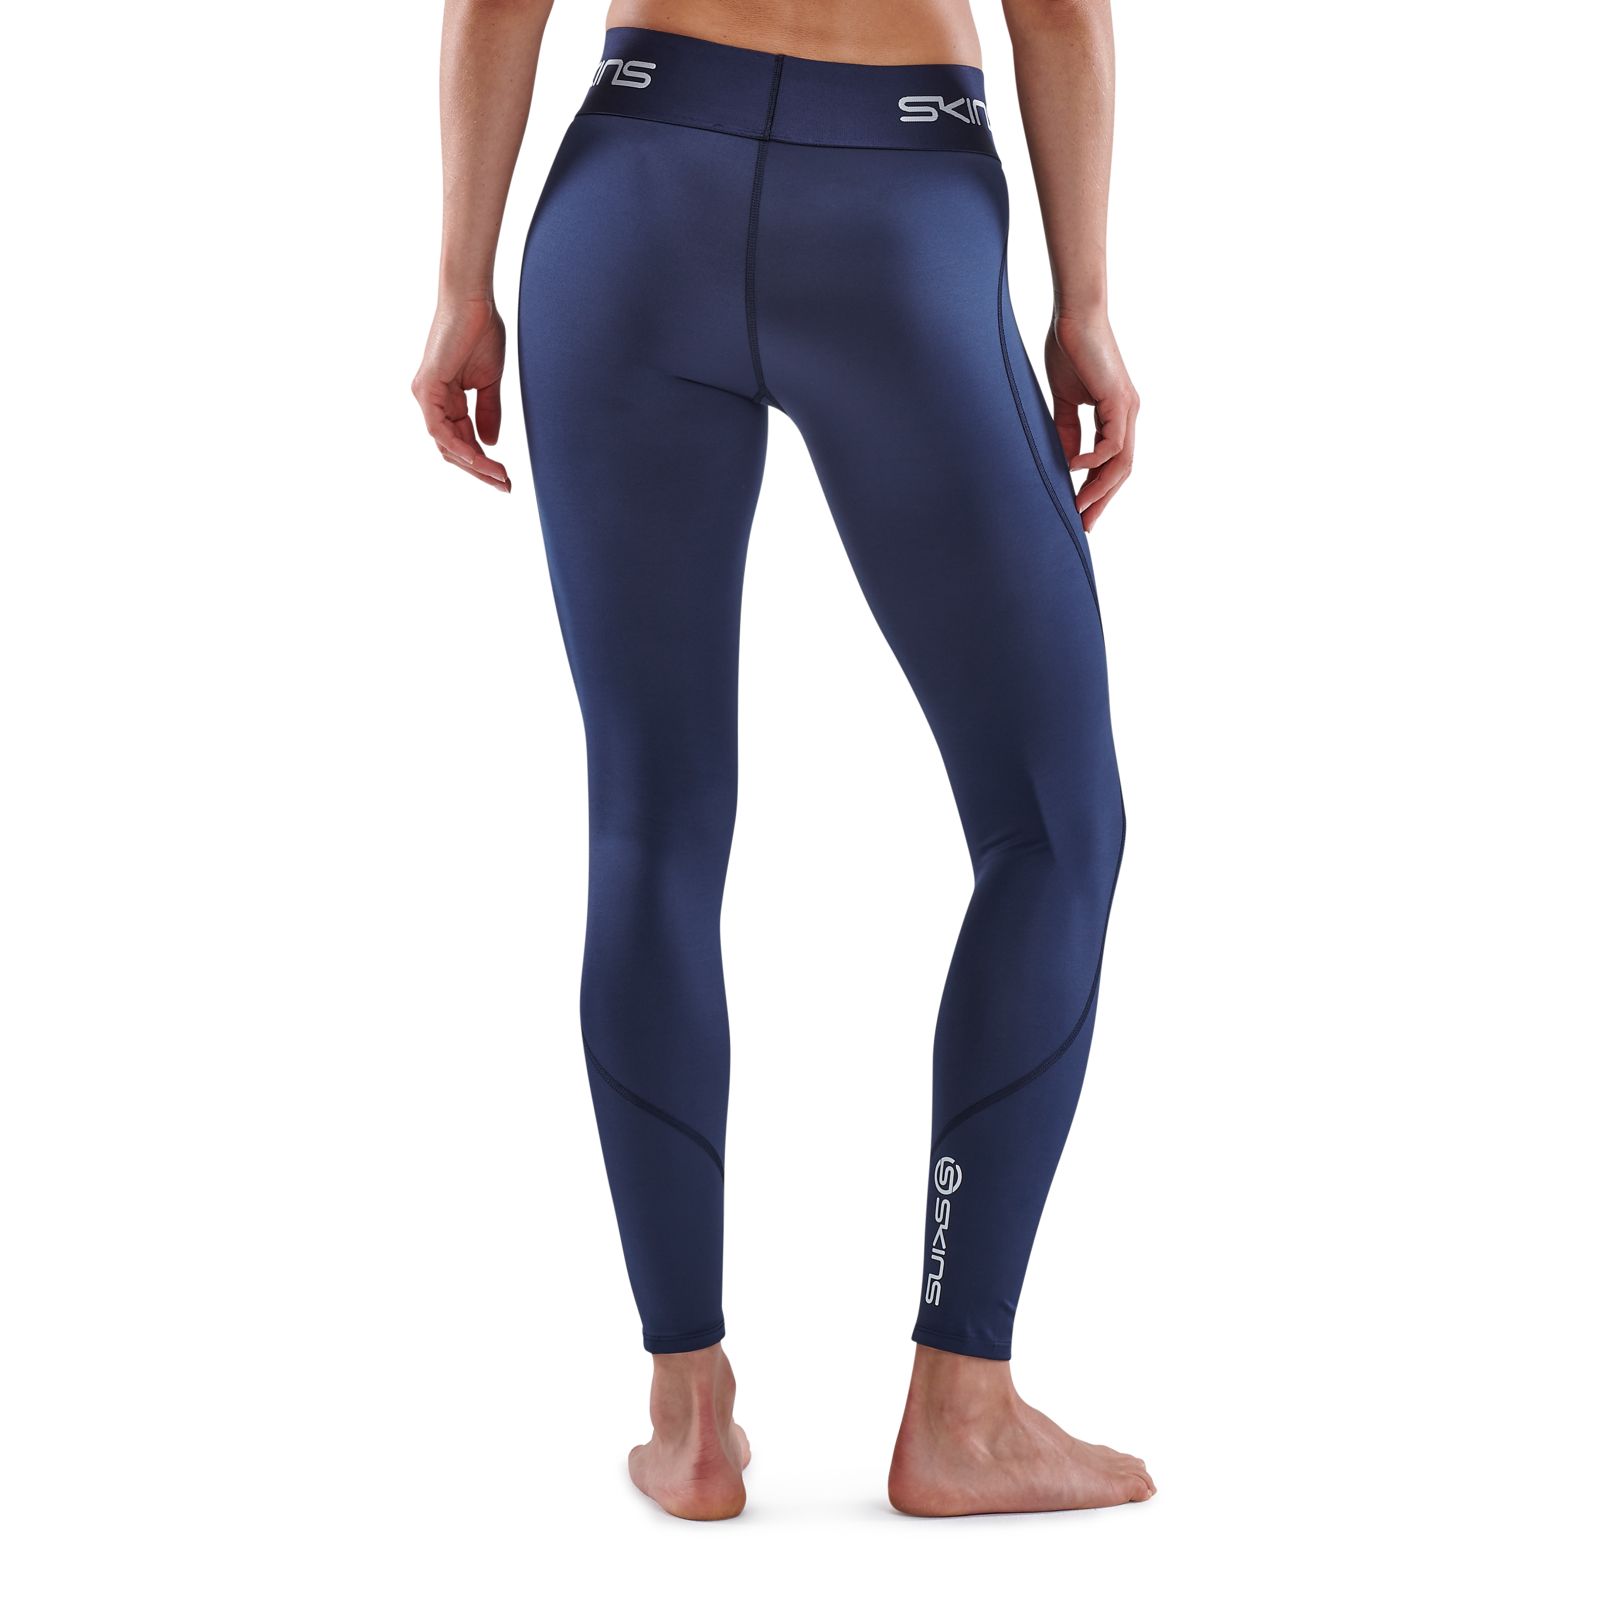 SKINS SERIES-1 WOMEN'S 7/8 TIGHTS NAVY BLUE - SKINS Compression USA